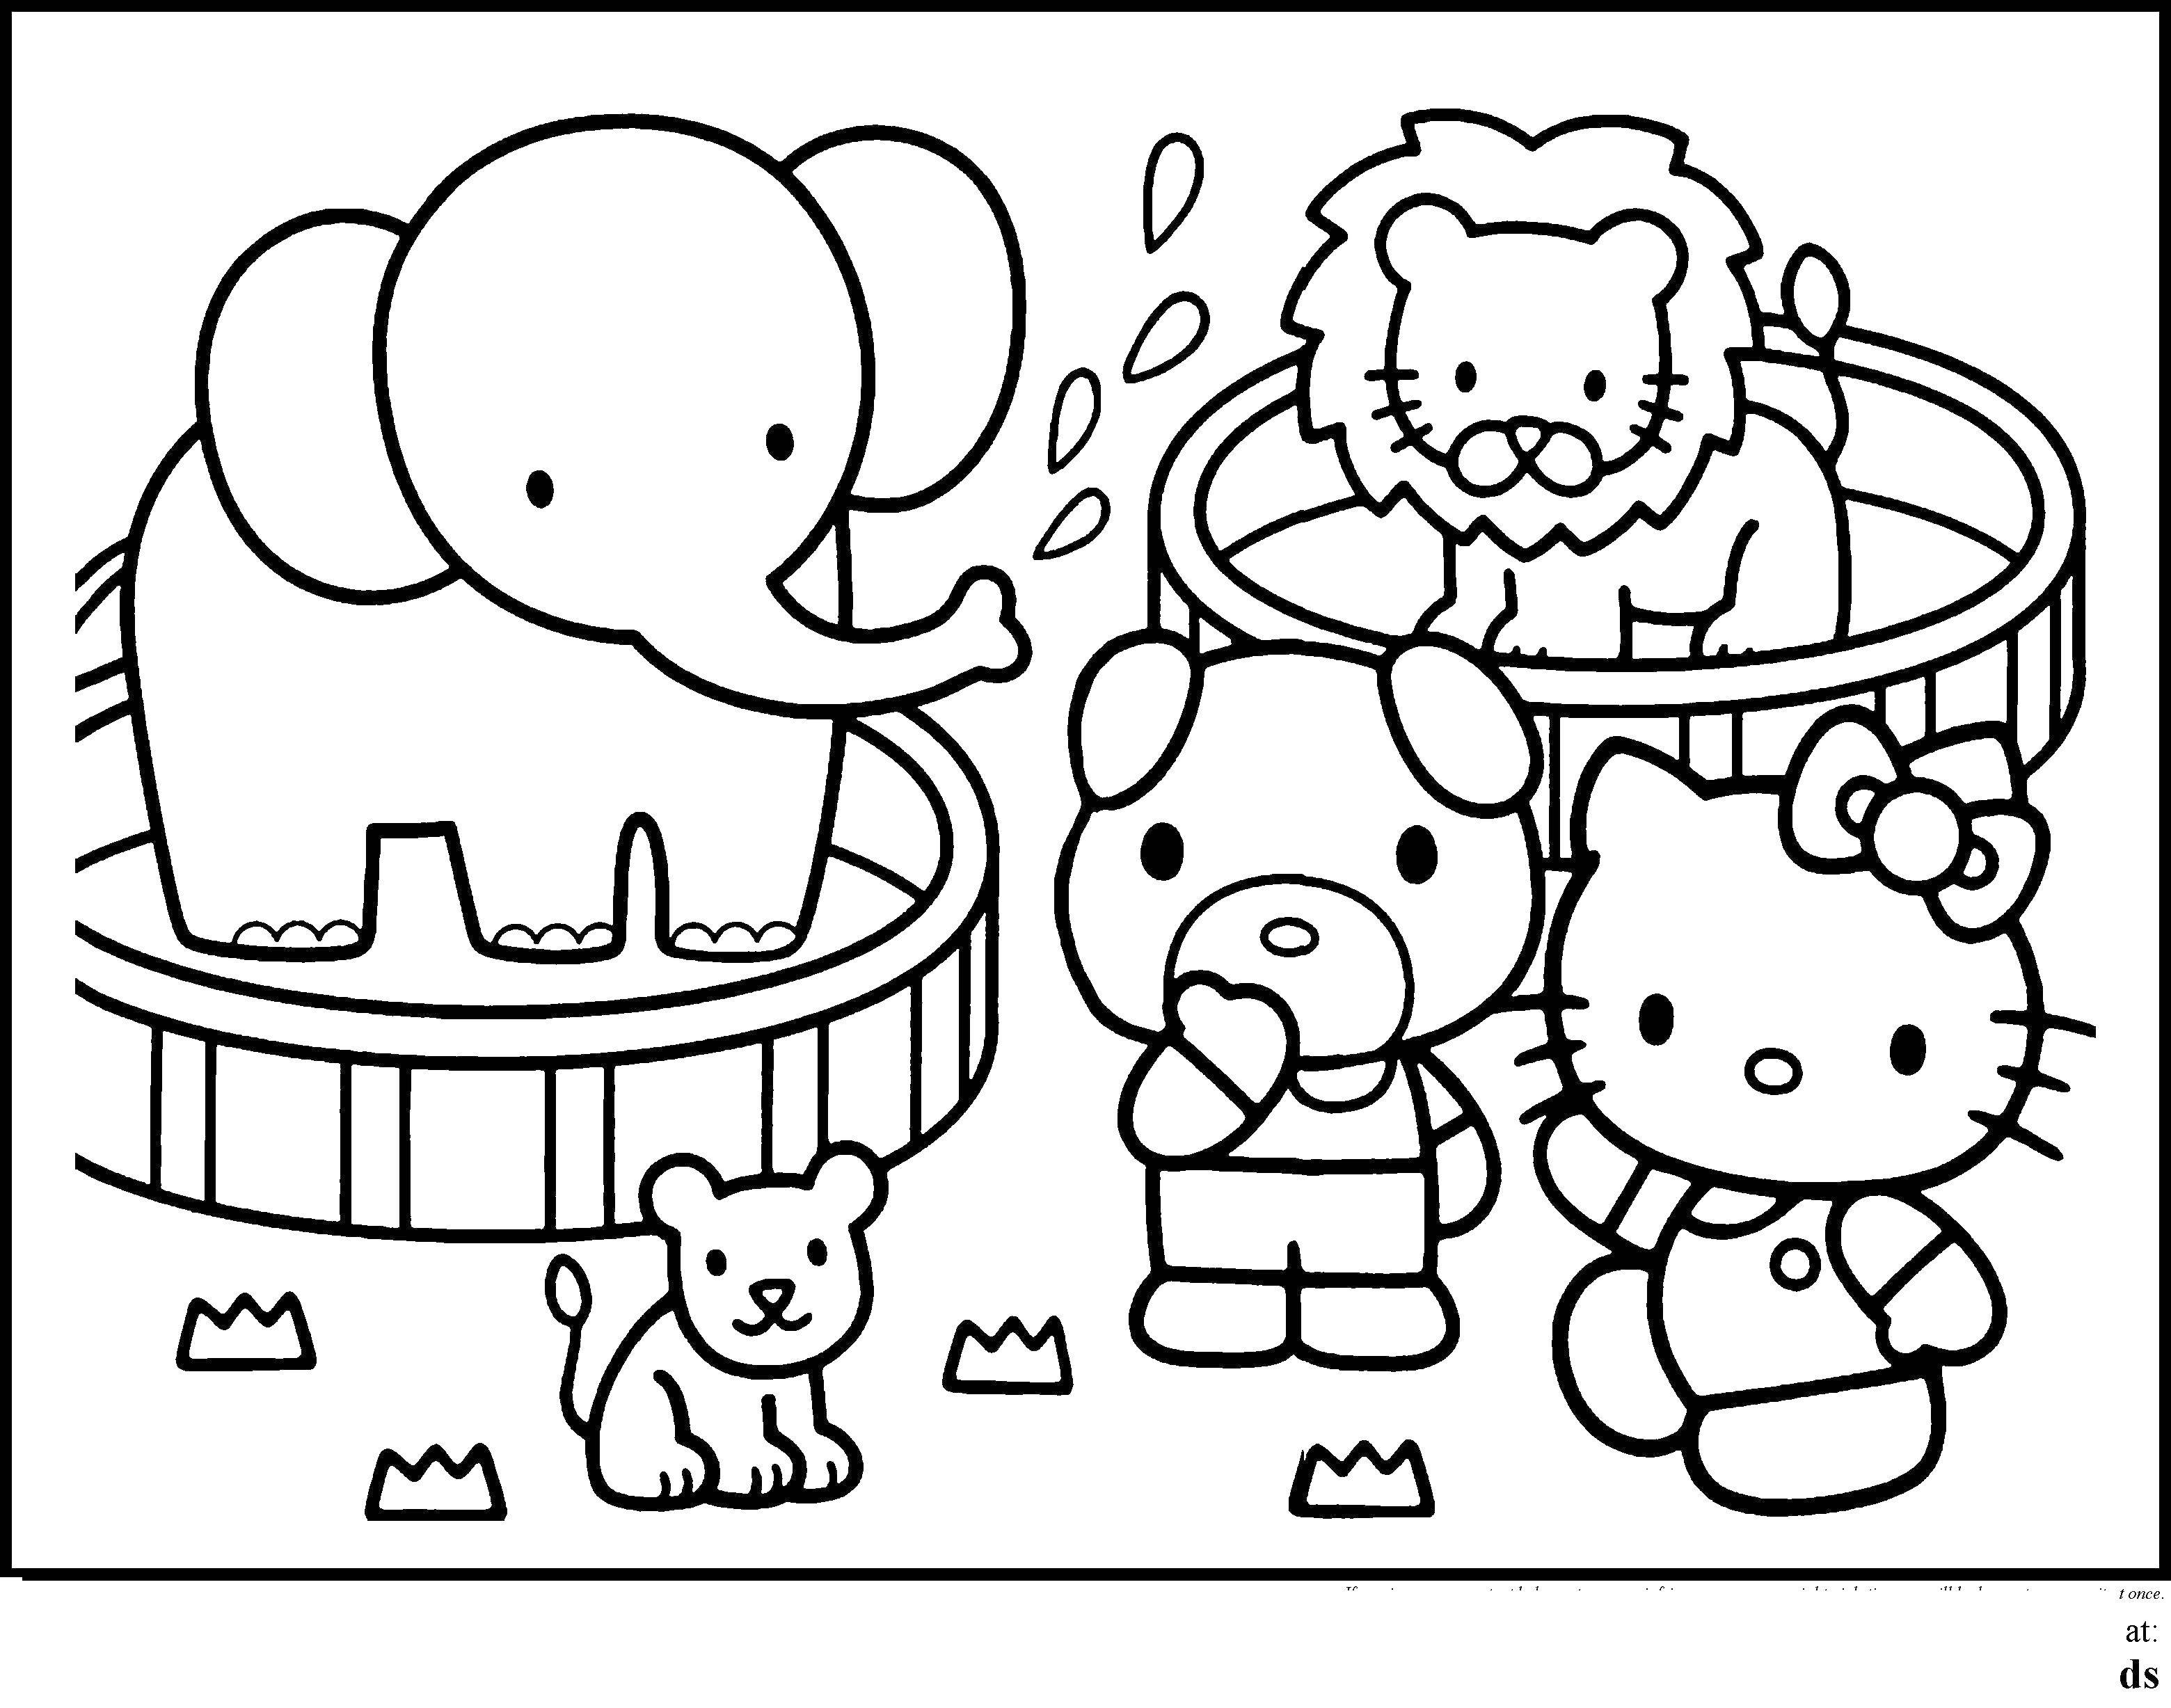 Coloring Hello kitty in the zoo. Category Hello Kitty. Tags:  Kitty, zoo.